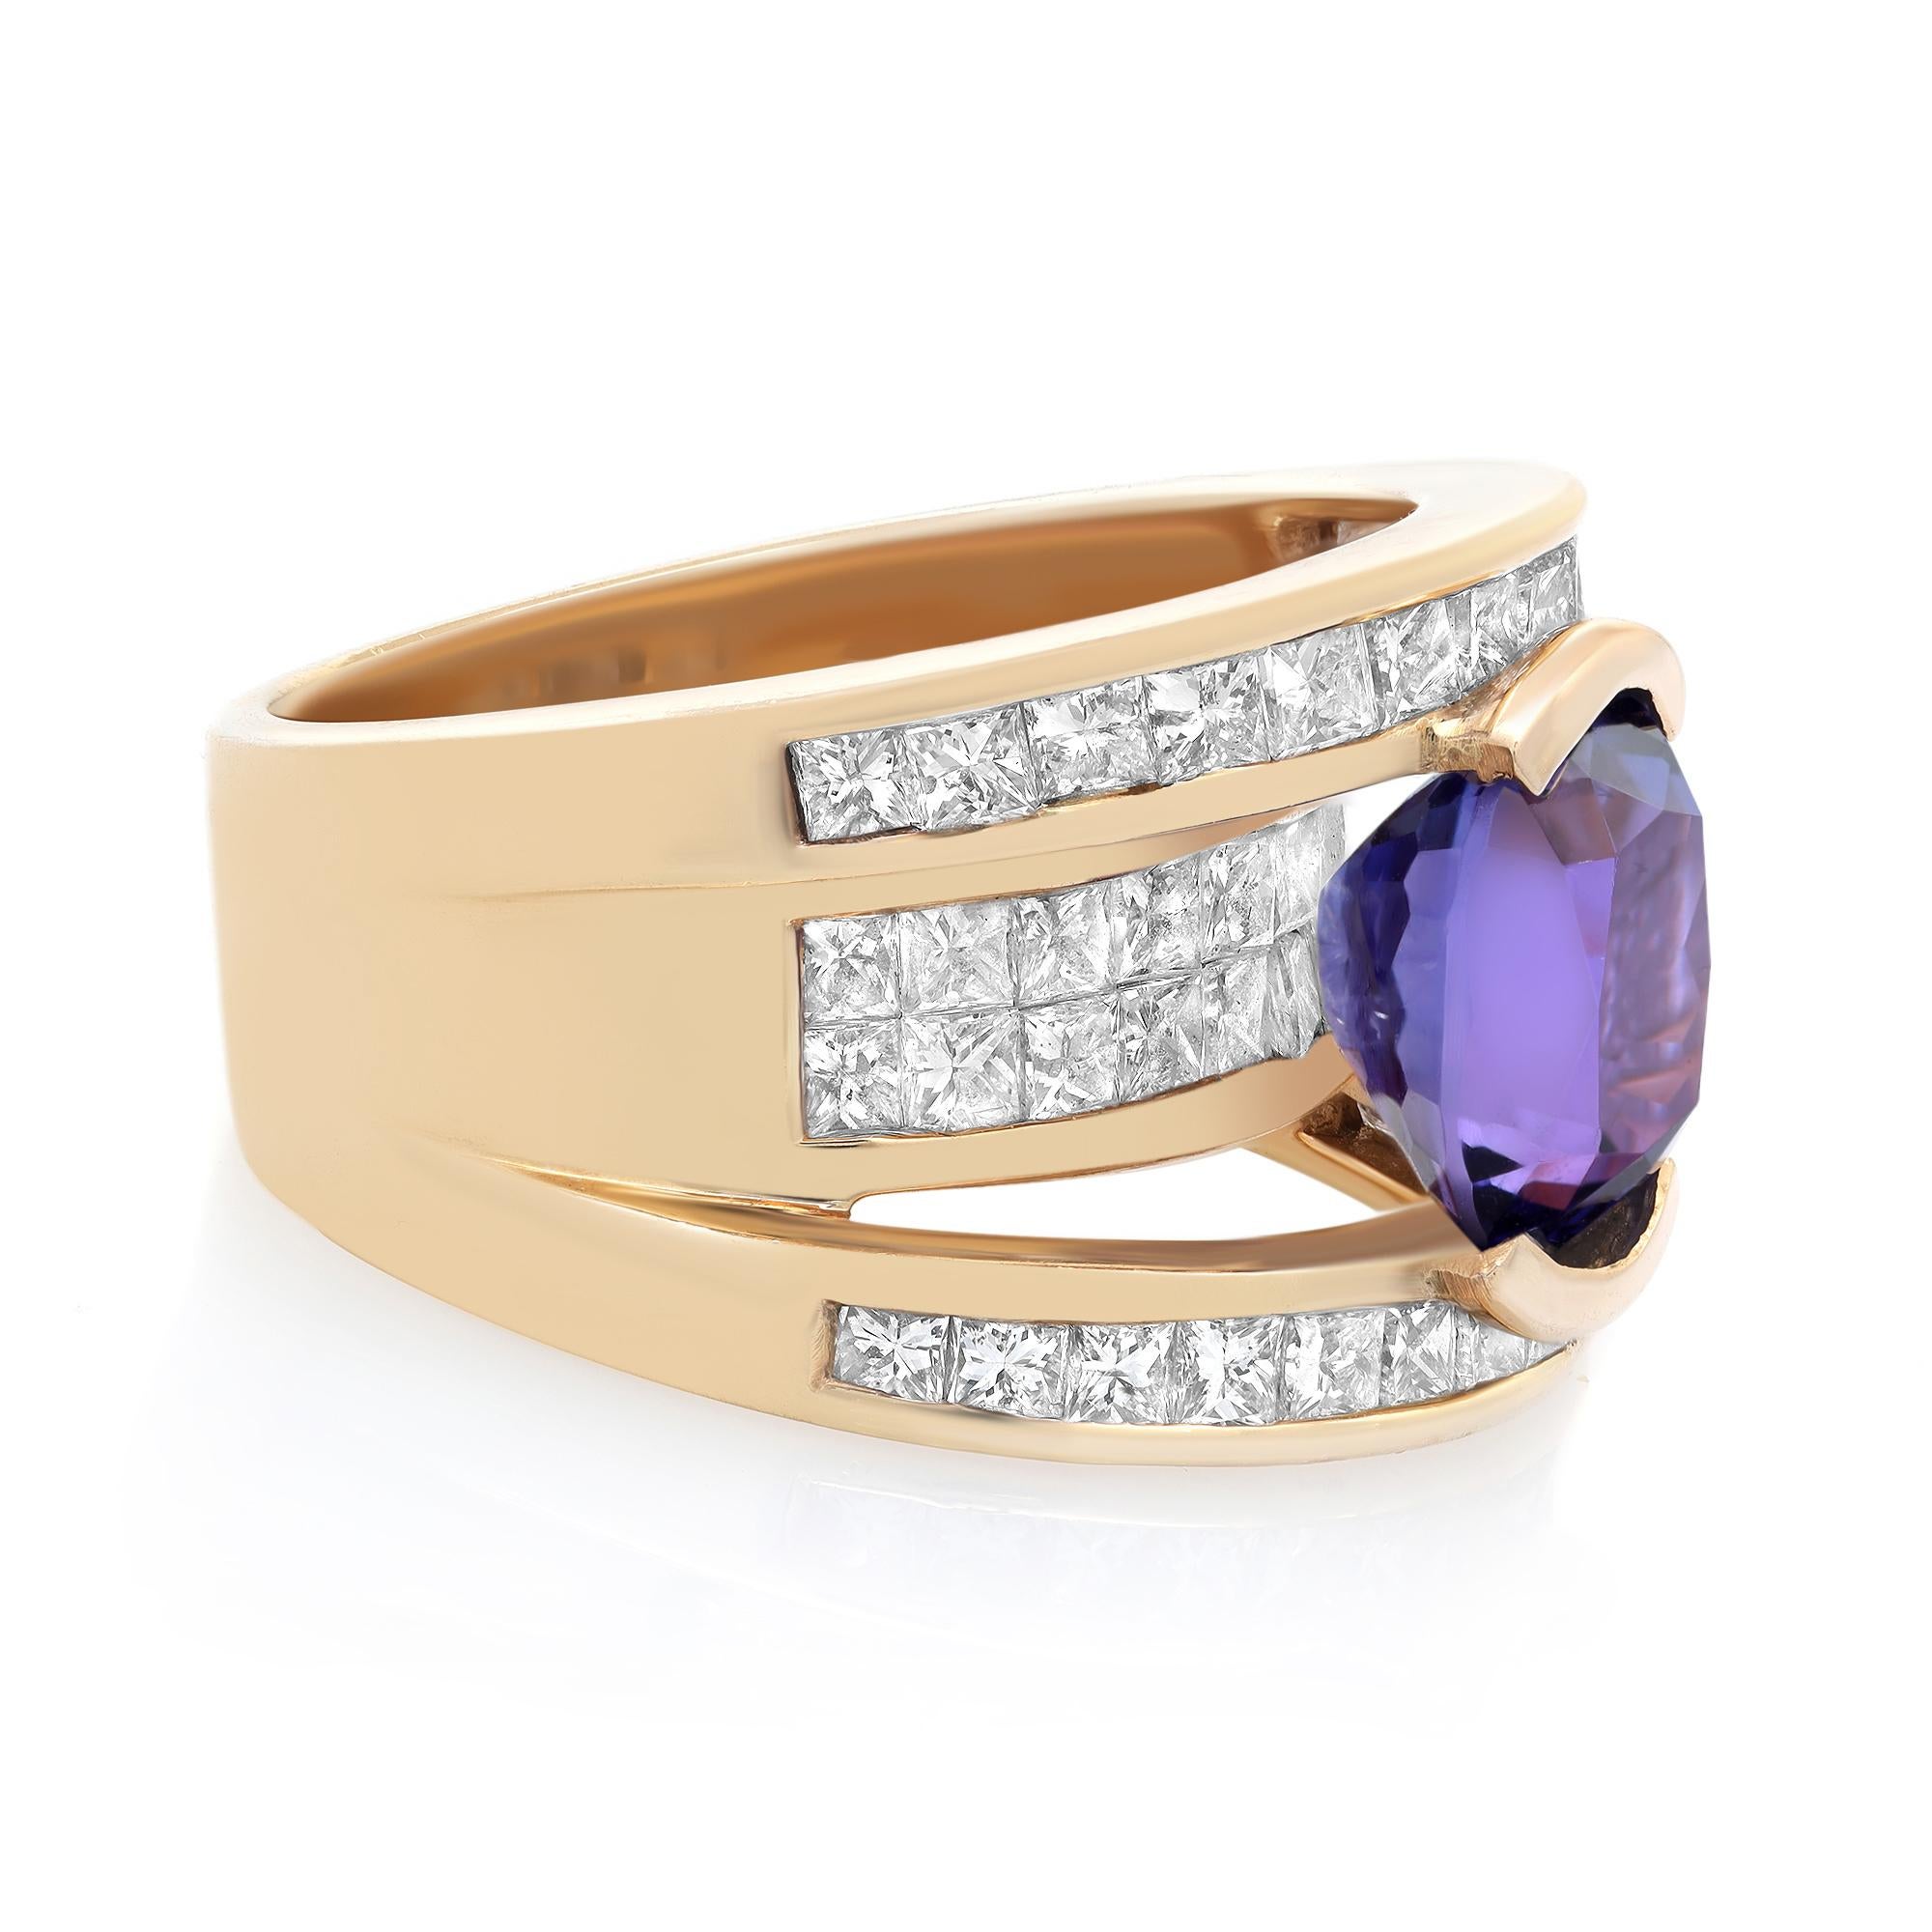 Modern 4.05cts Oval Tanzanite & 3.35Cts Diamond Cocktail Ring 14K Yellow Gold For Sale